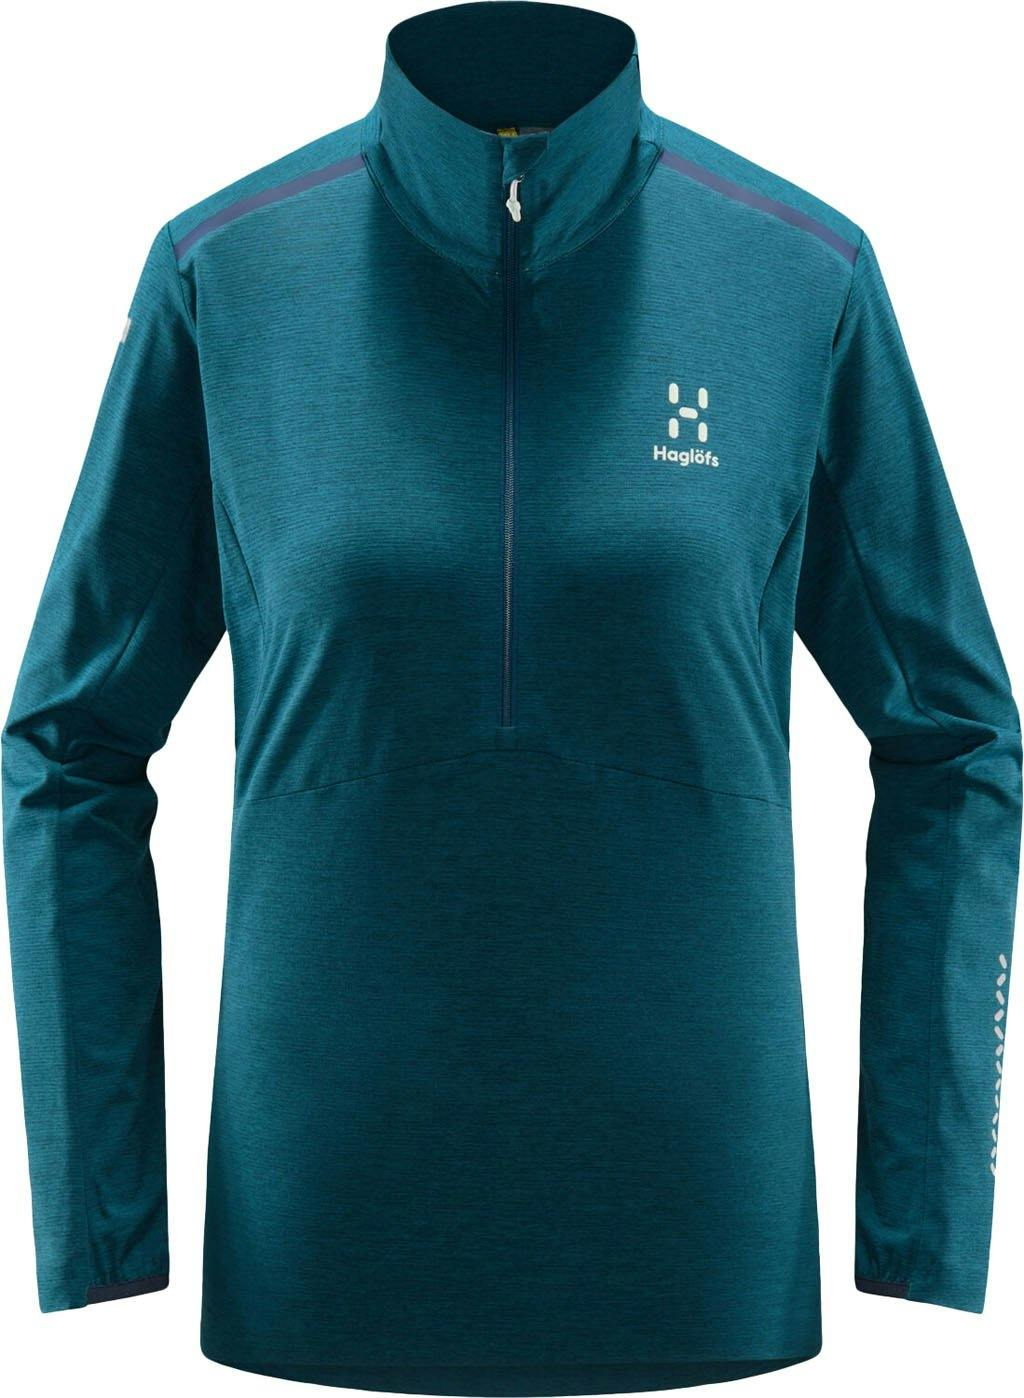 Product image for L.I.M Strive Half-Zip Long Sleeve Top - Women's